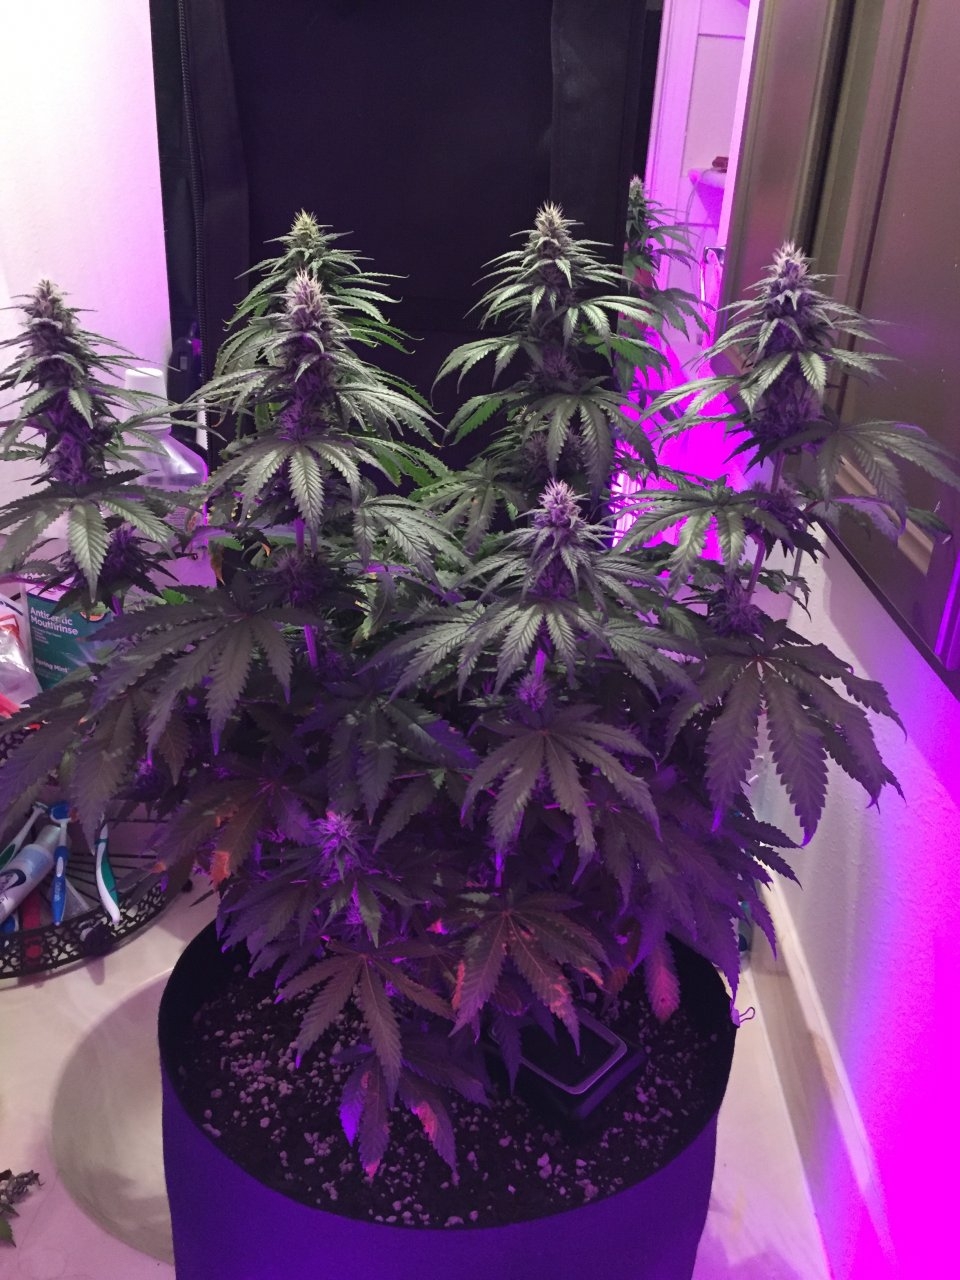 Finally a pic without blurple lights. Week 6 flowering with KindSoil